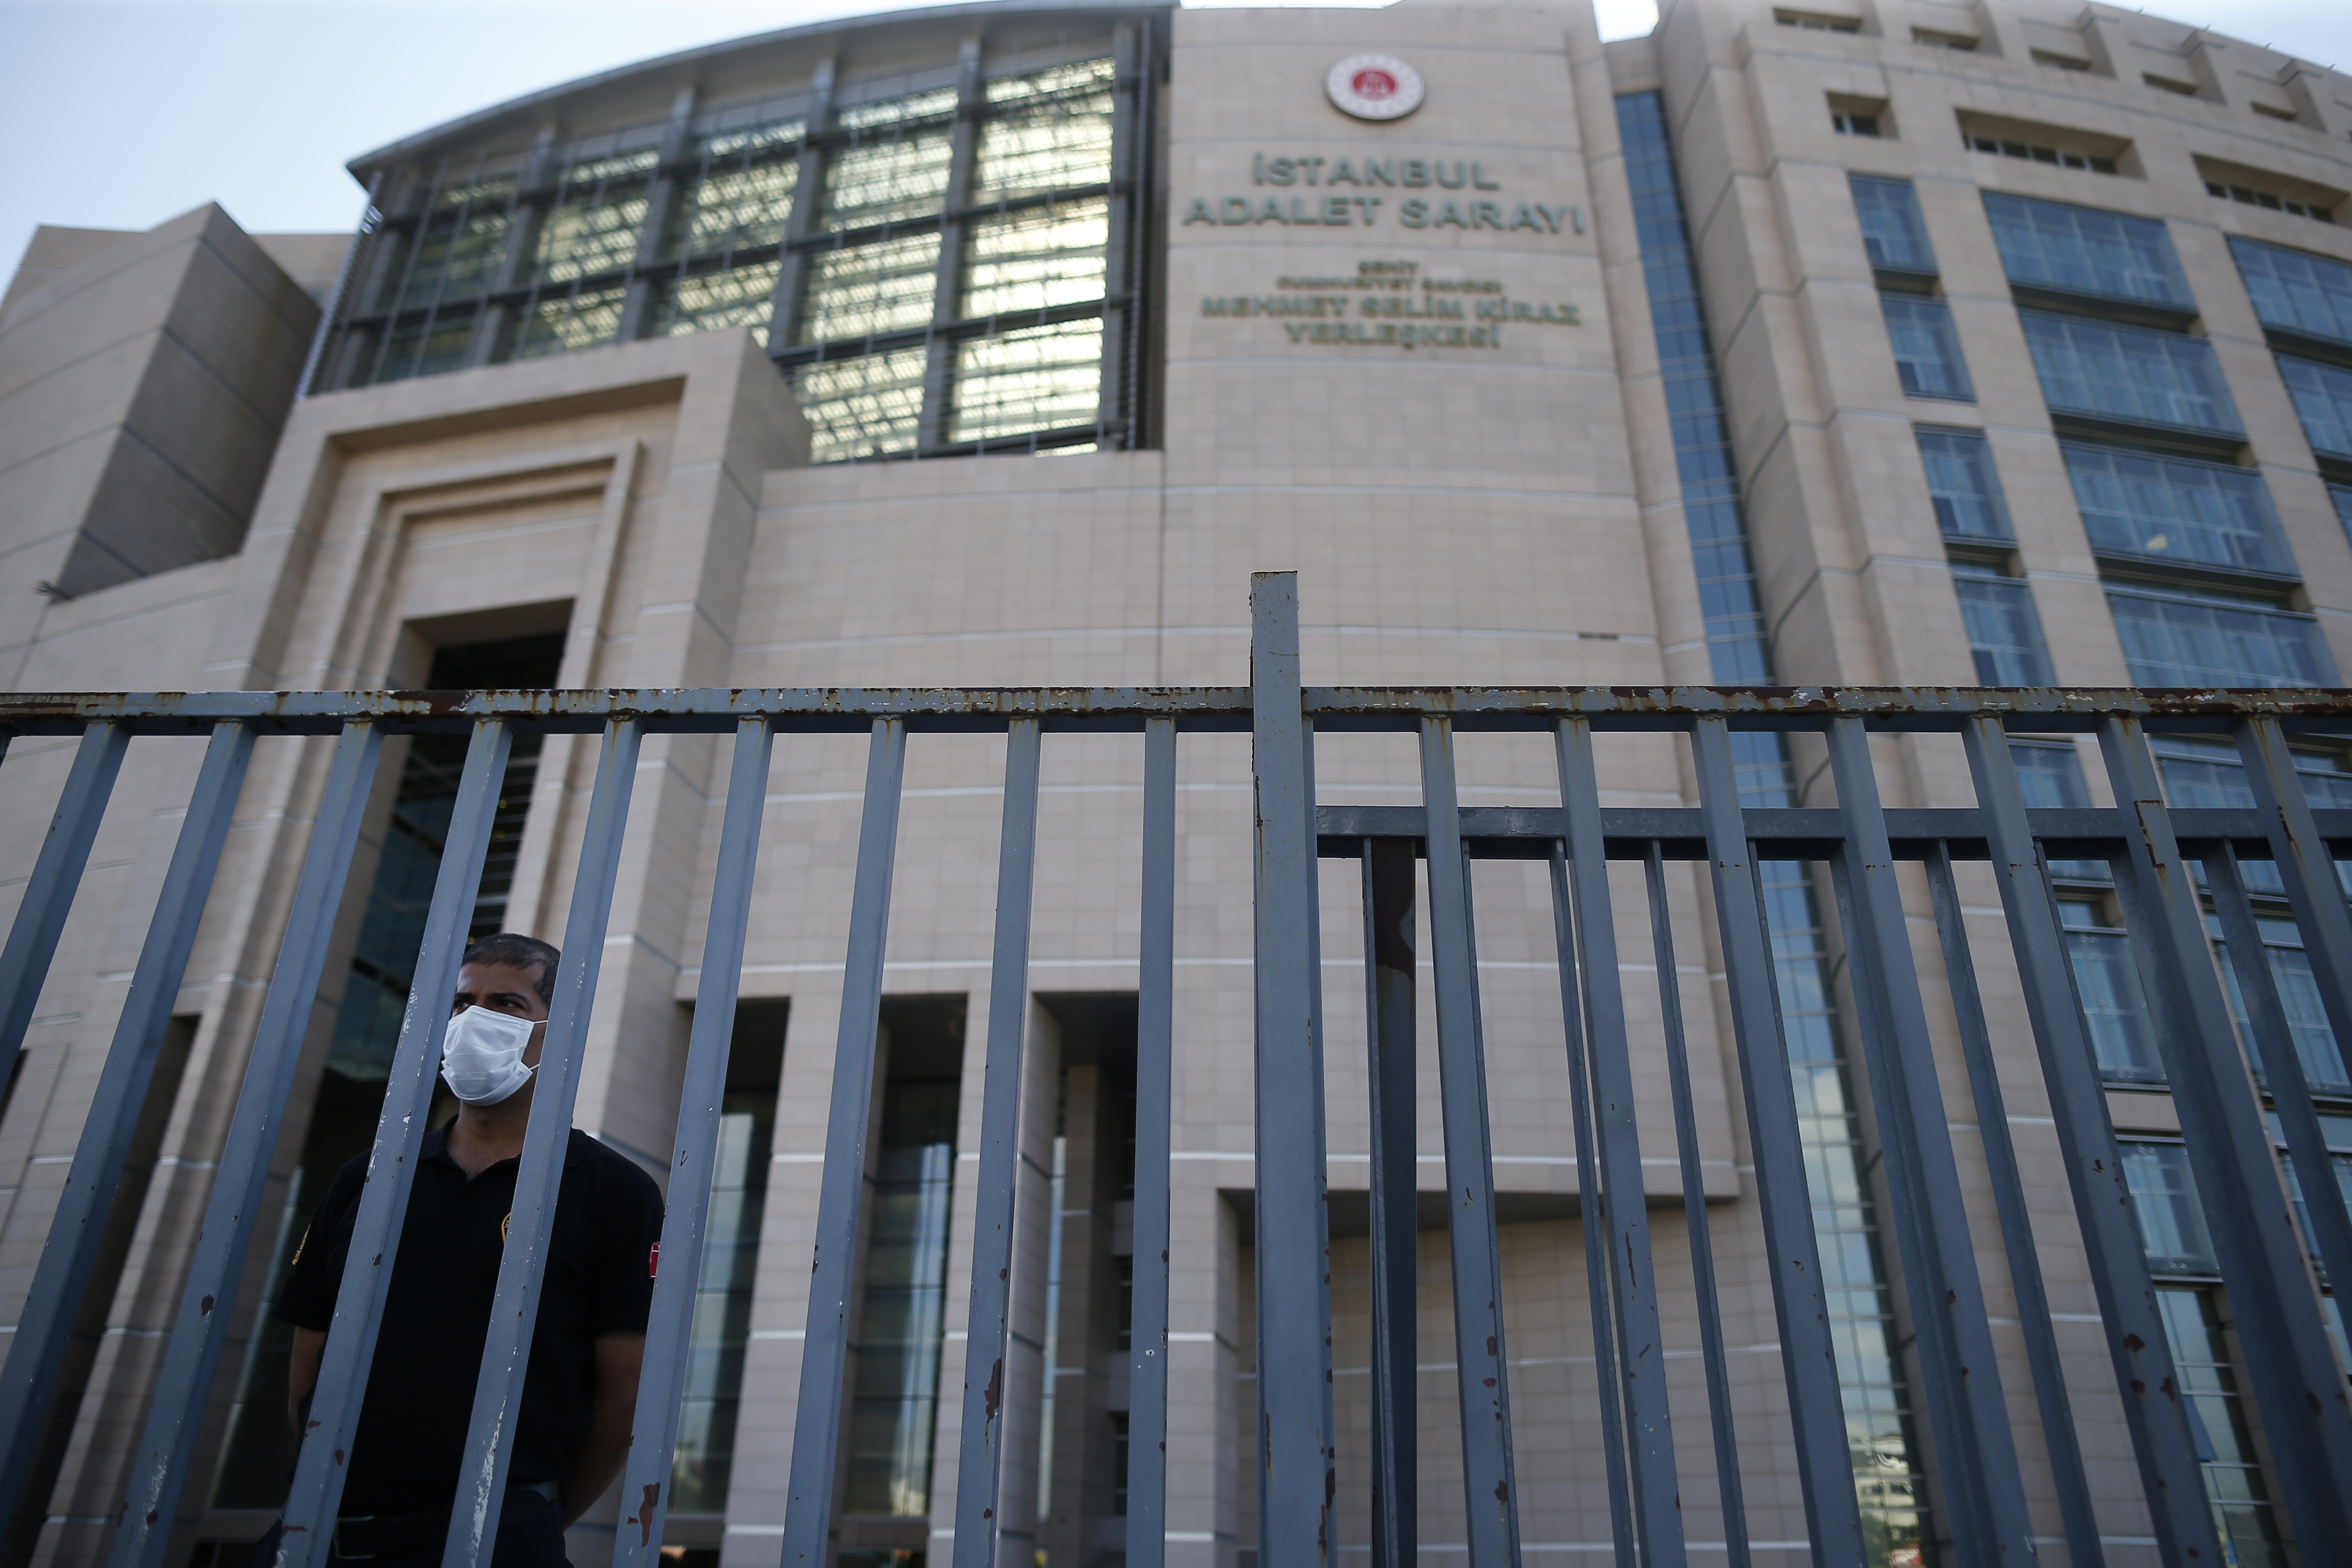 Turkey to try 2 journalists for alleged membership in terrorist groups - CPJ Press Freedom Online